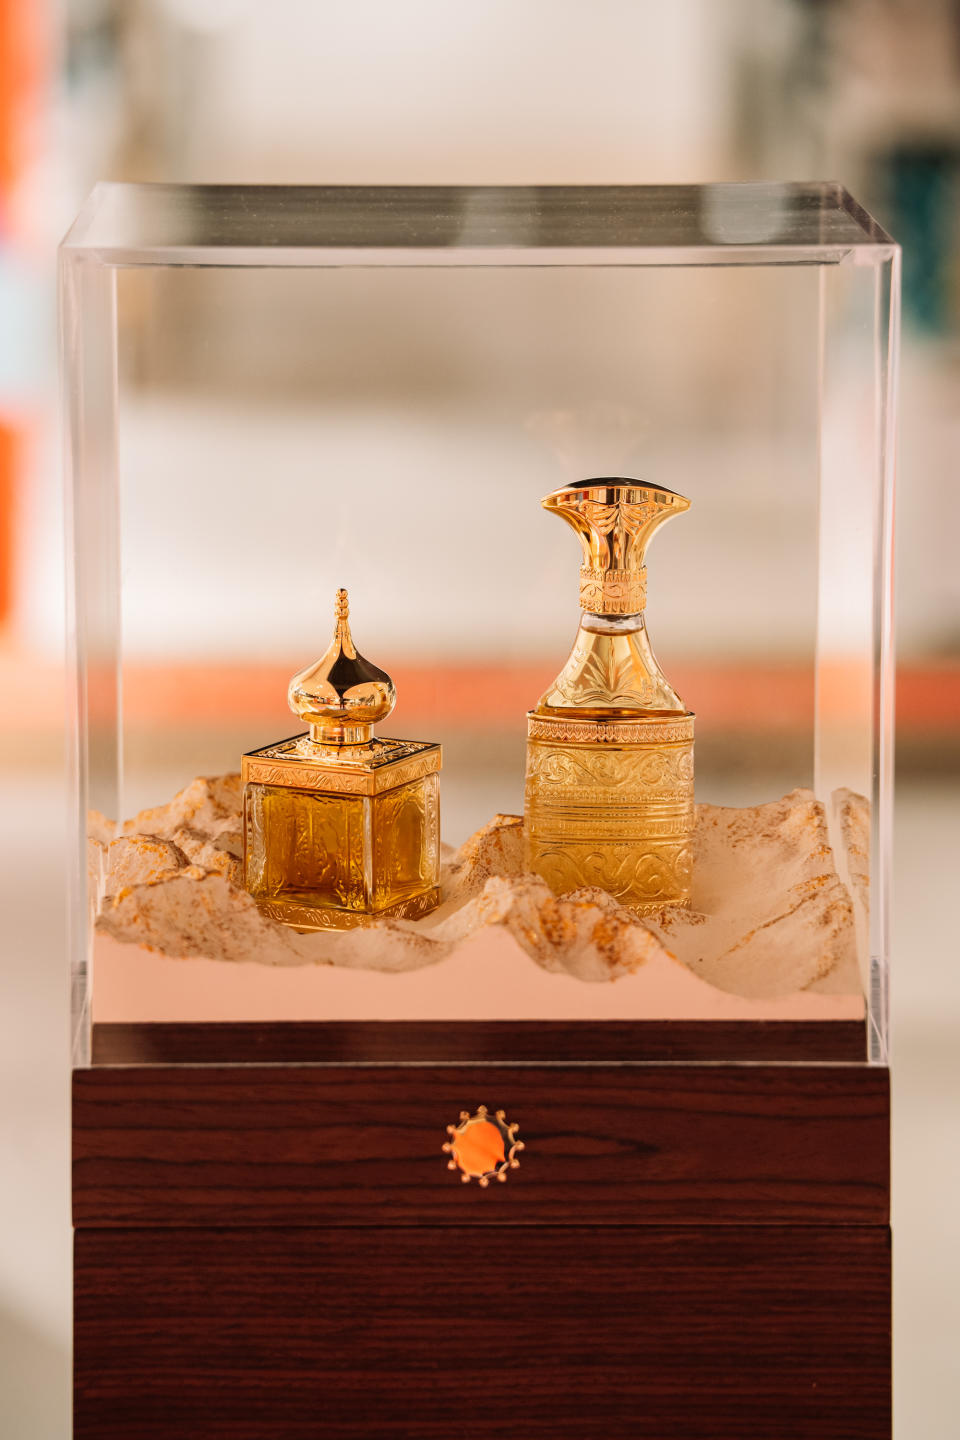 The Cristal & Gold 2023 limited-edition fragrances by Amouage displayed at the Rinascente Beauty Fair in Milan.